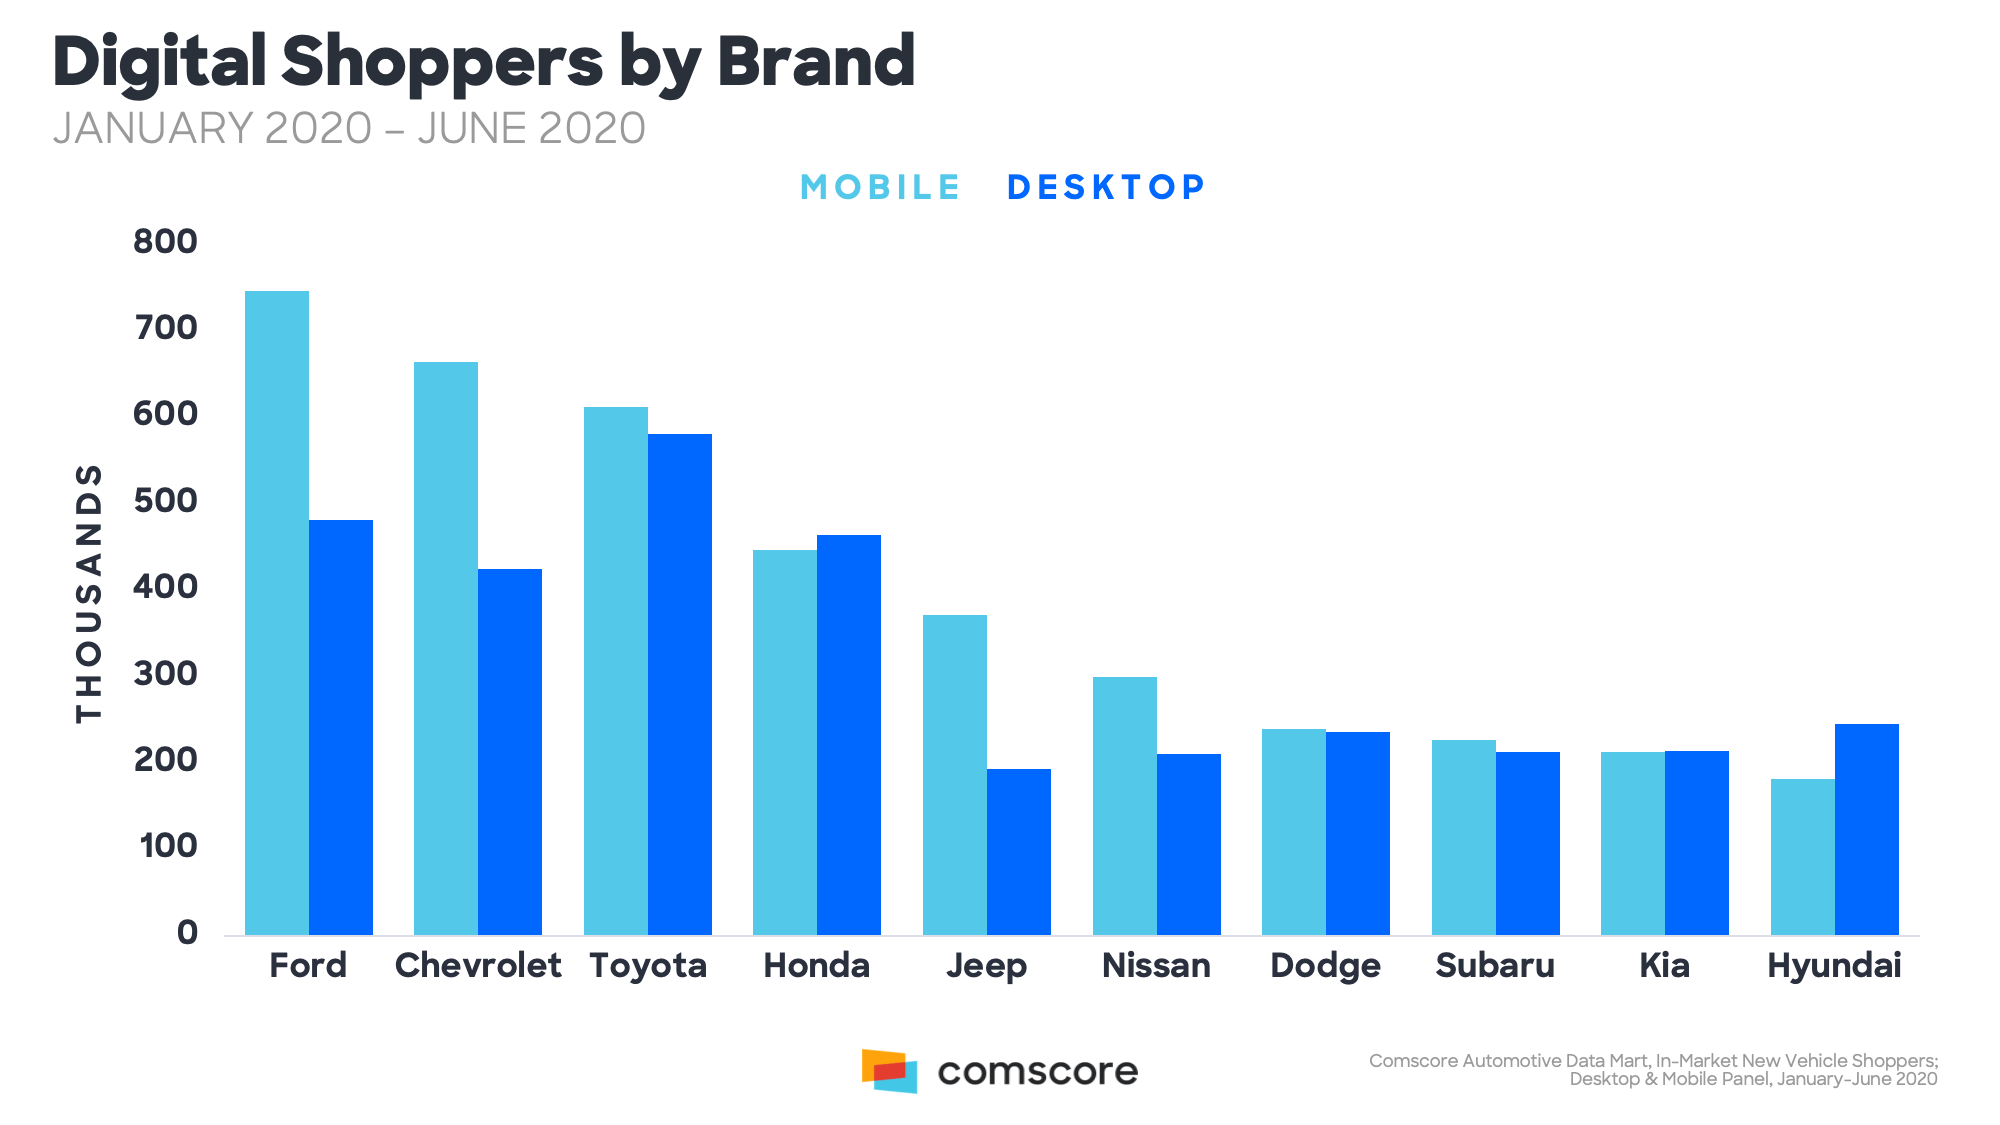 Digital Shoppers by Brand